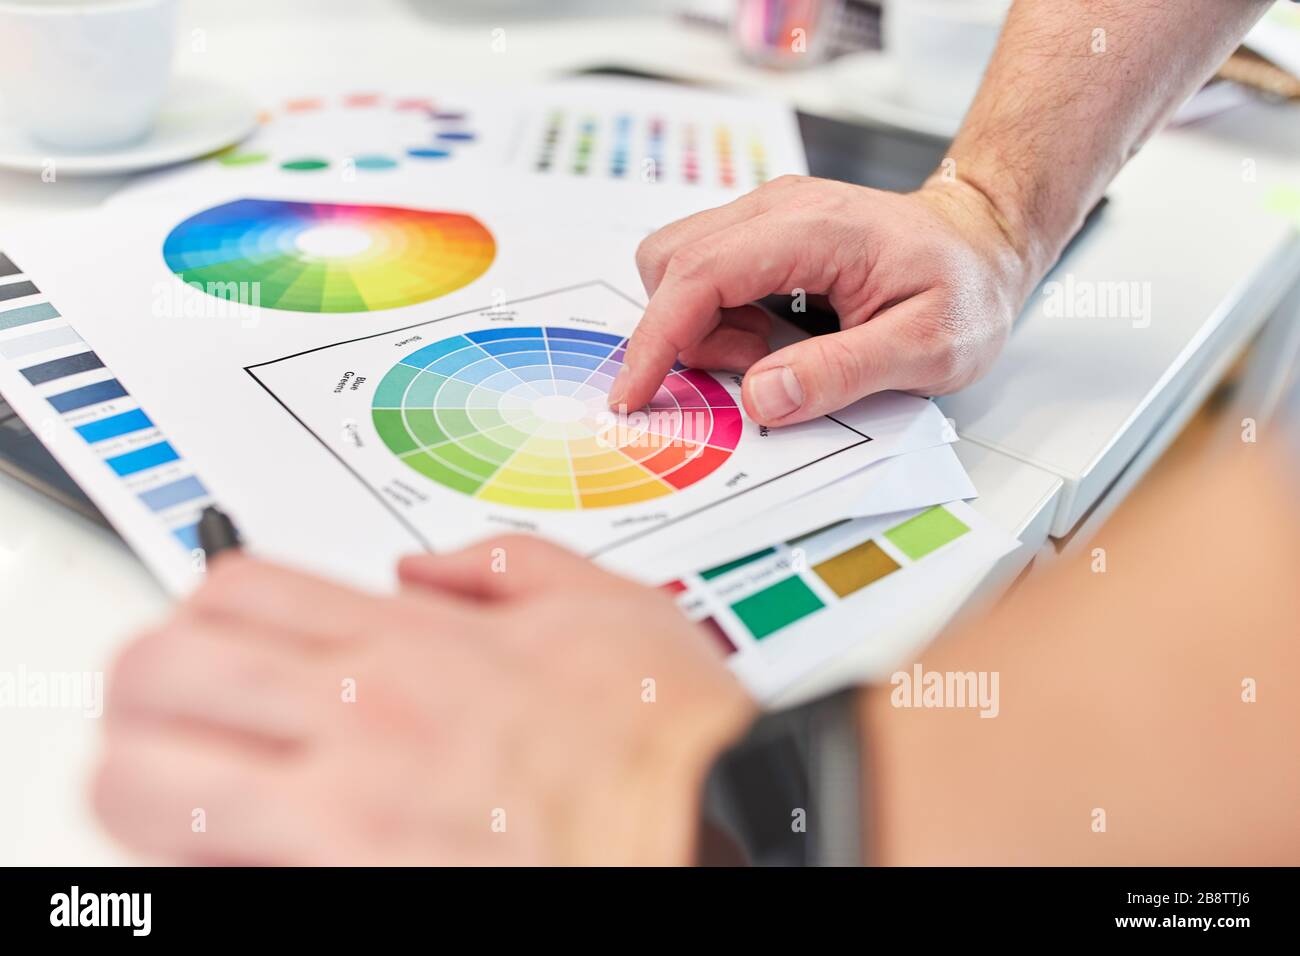 Graphic designer points to the color palette when discussing graphic design Stock Photo